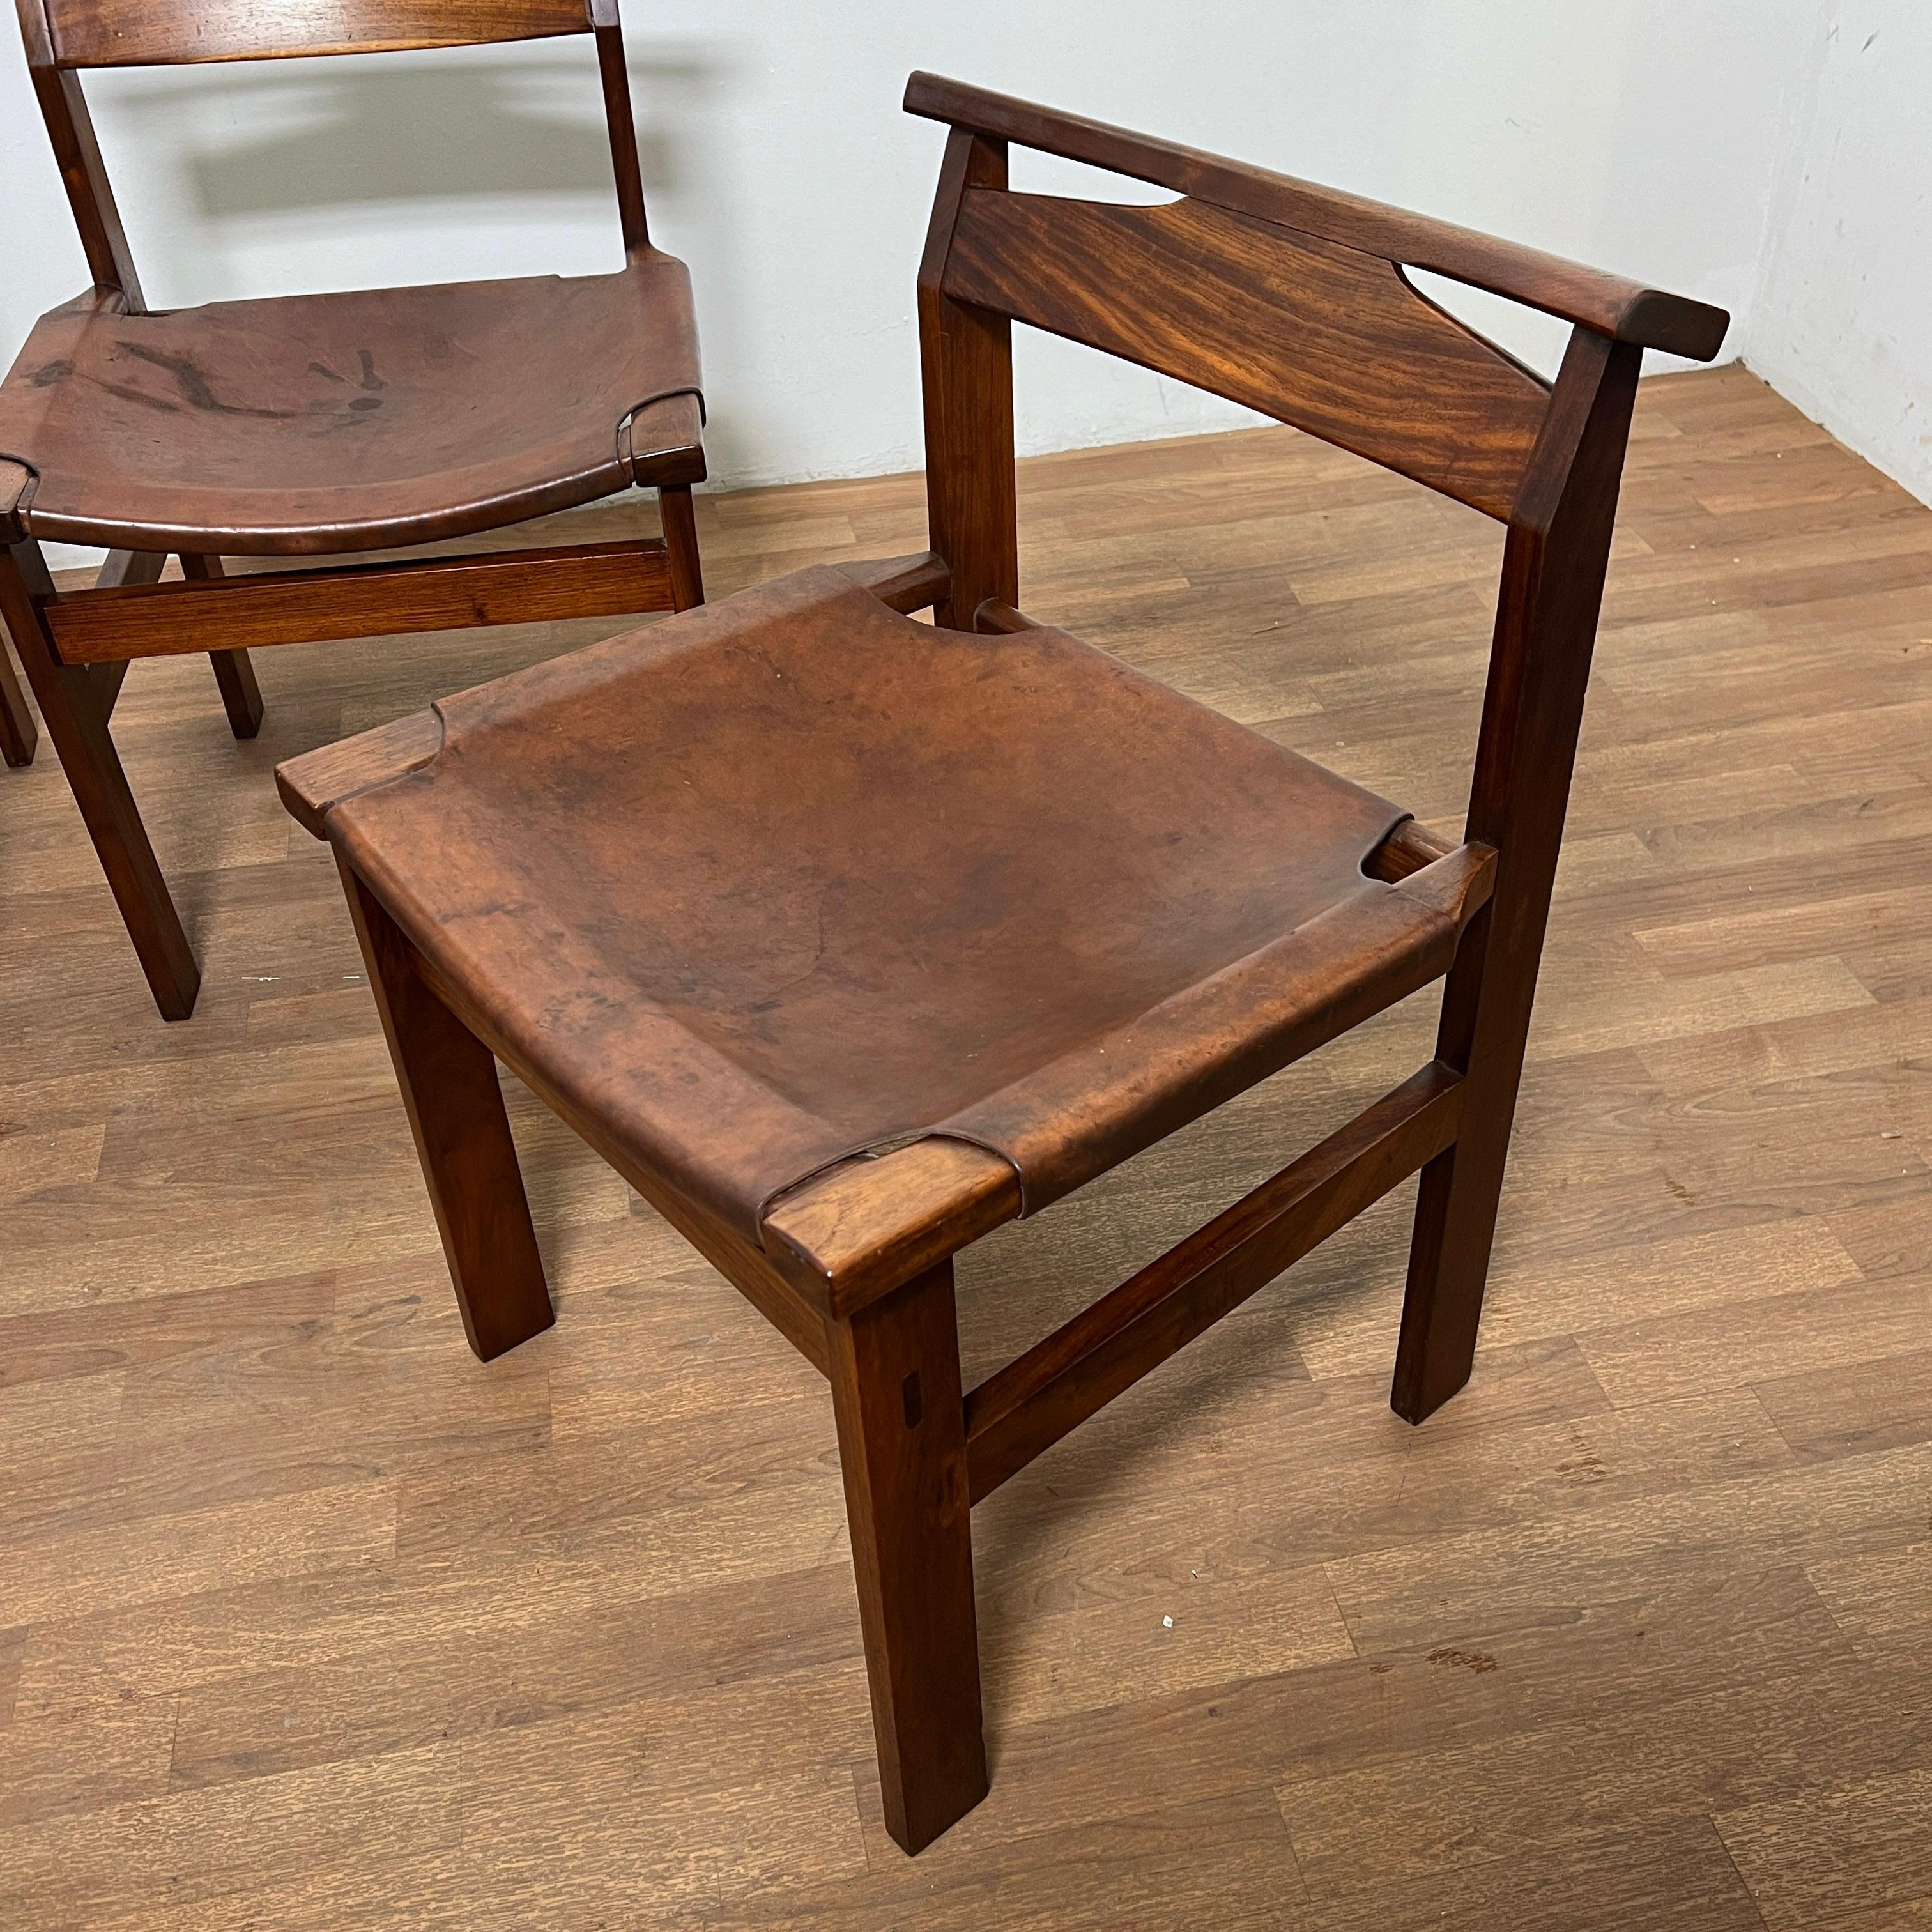 Set of four Africal Modernist chairs designed by John Tabraham for Kallenbach’s, a firm founded in the early 20th century by the noted architect Herman Kallenbach, who was also a close friend of Mahatma Gandhi. Made in South Africa, circa 1960s,